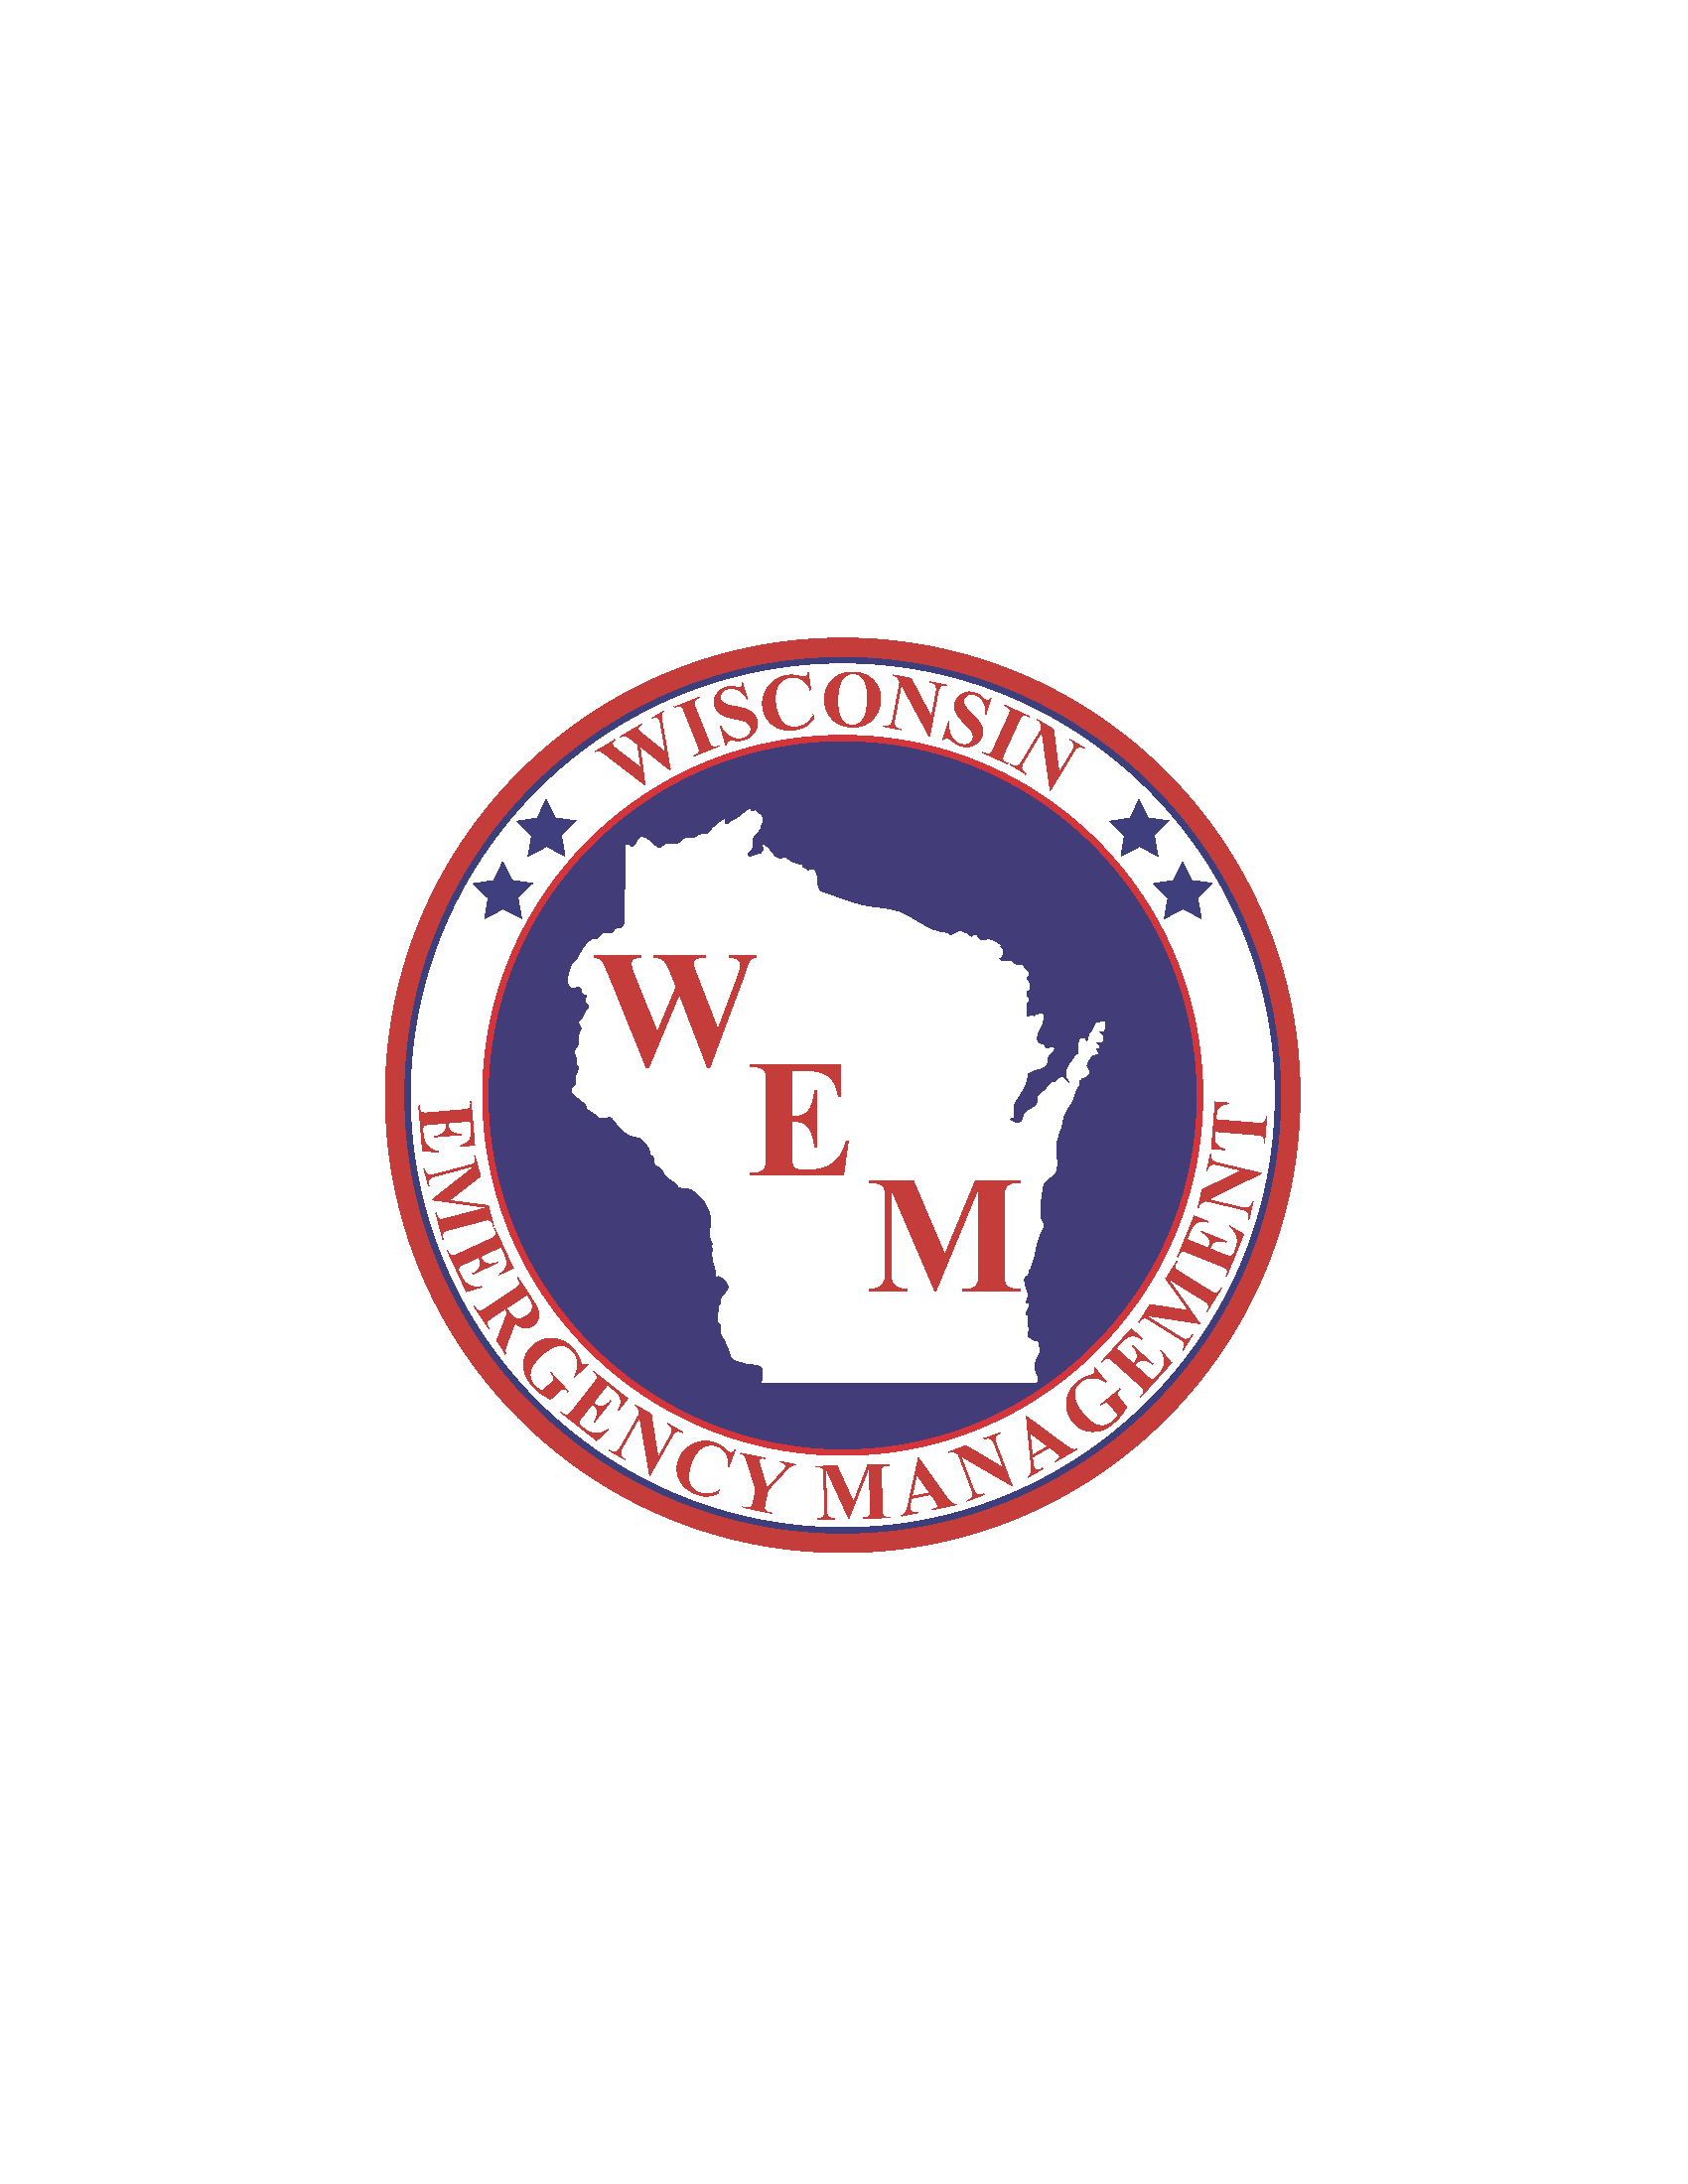 Wisconsin Emergency Management Image And Historic Materials Madison Libraries